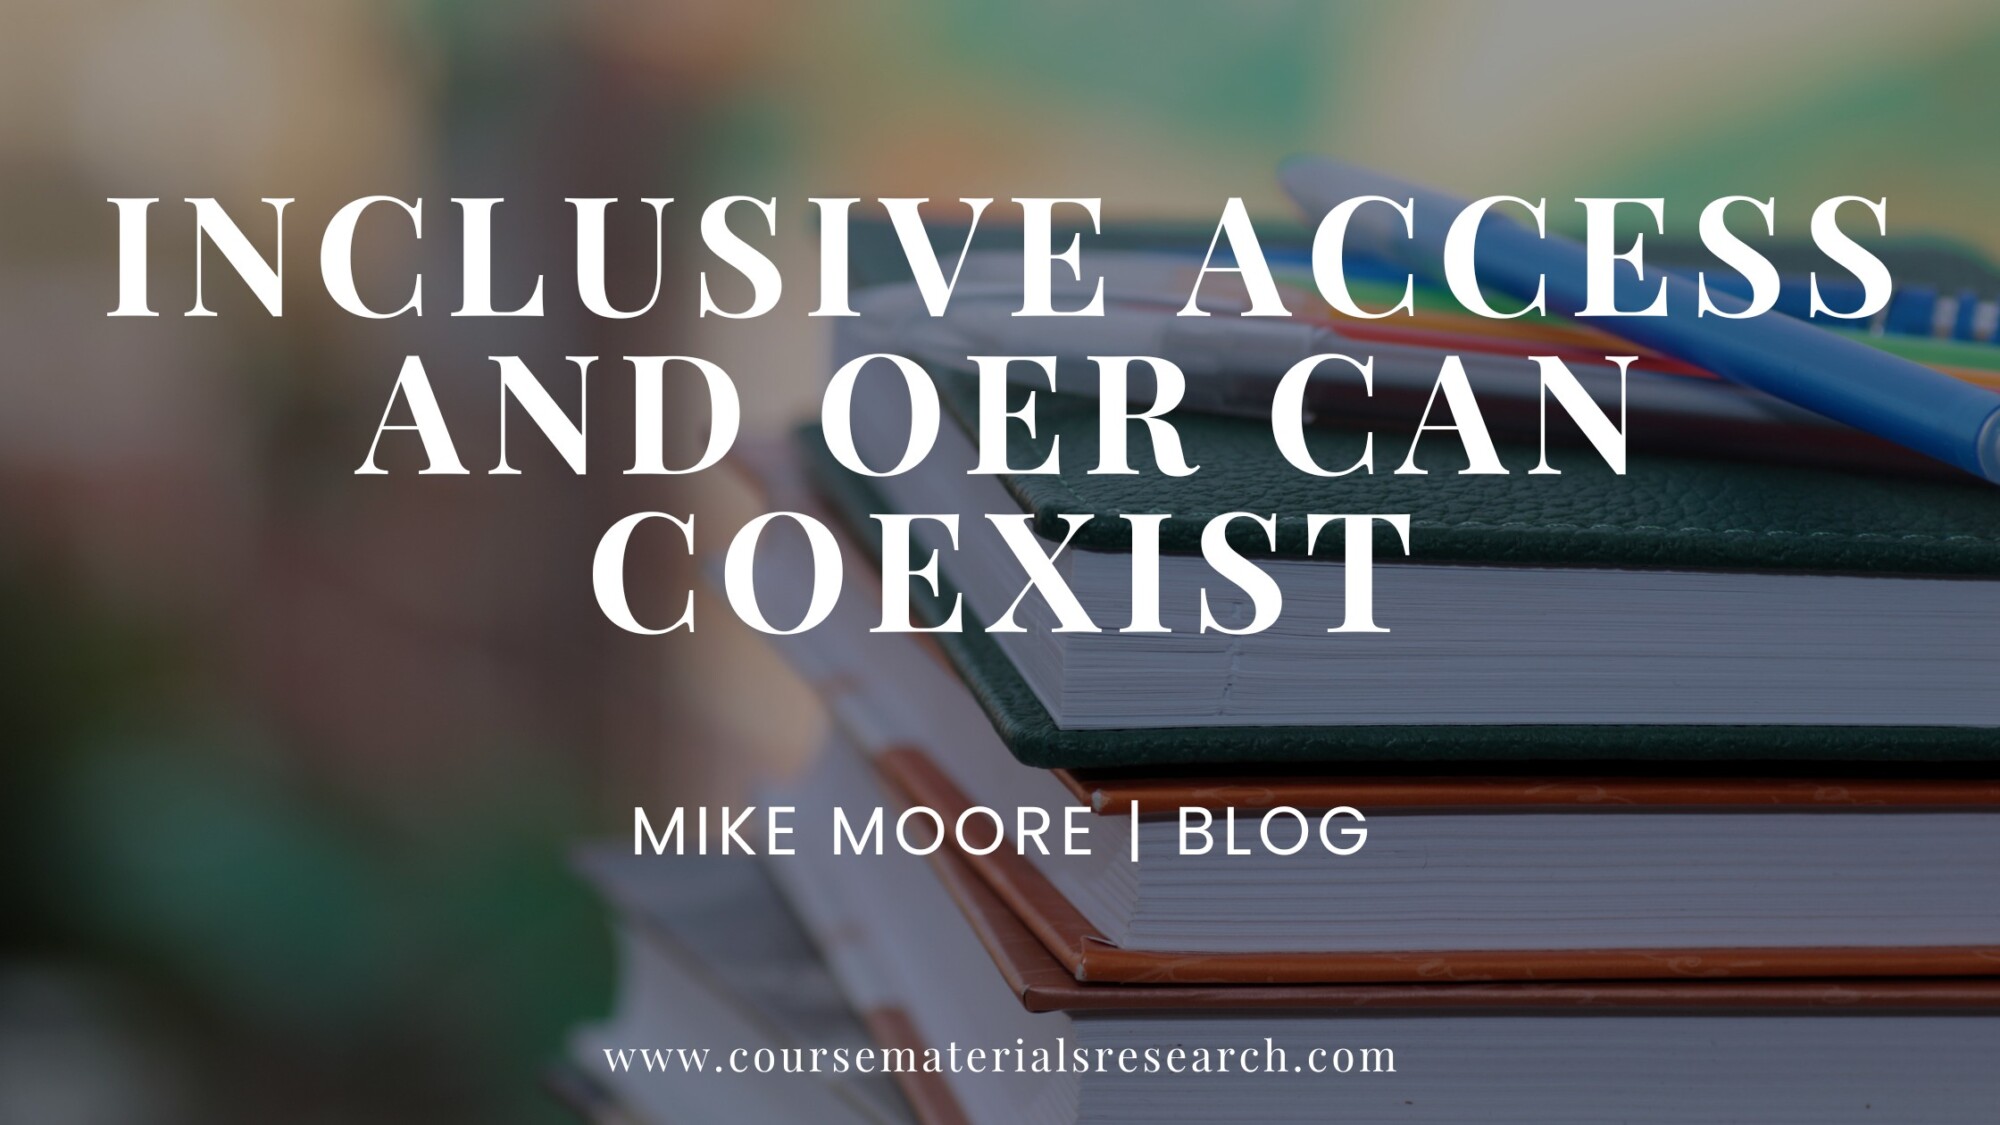 IA and OER can coexist